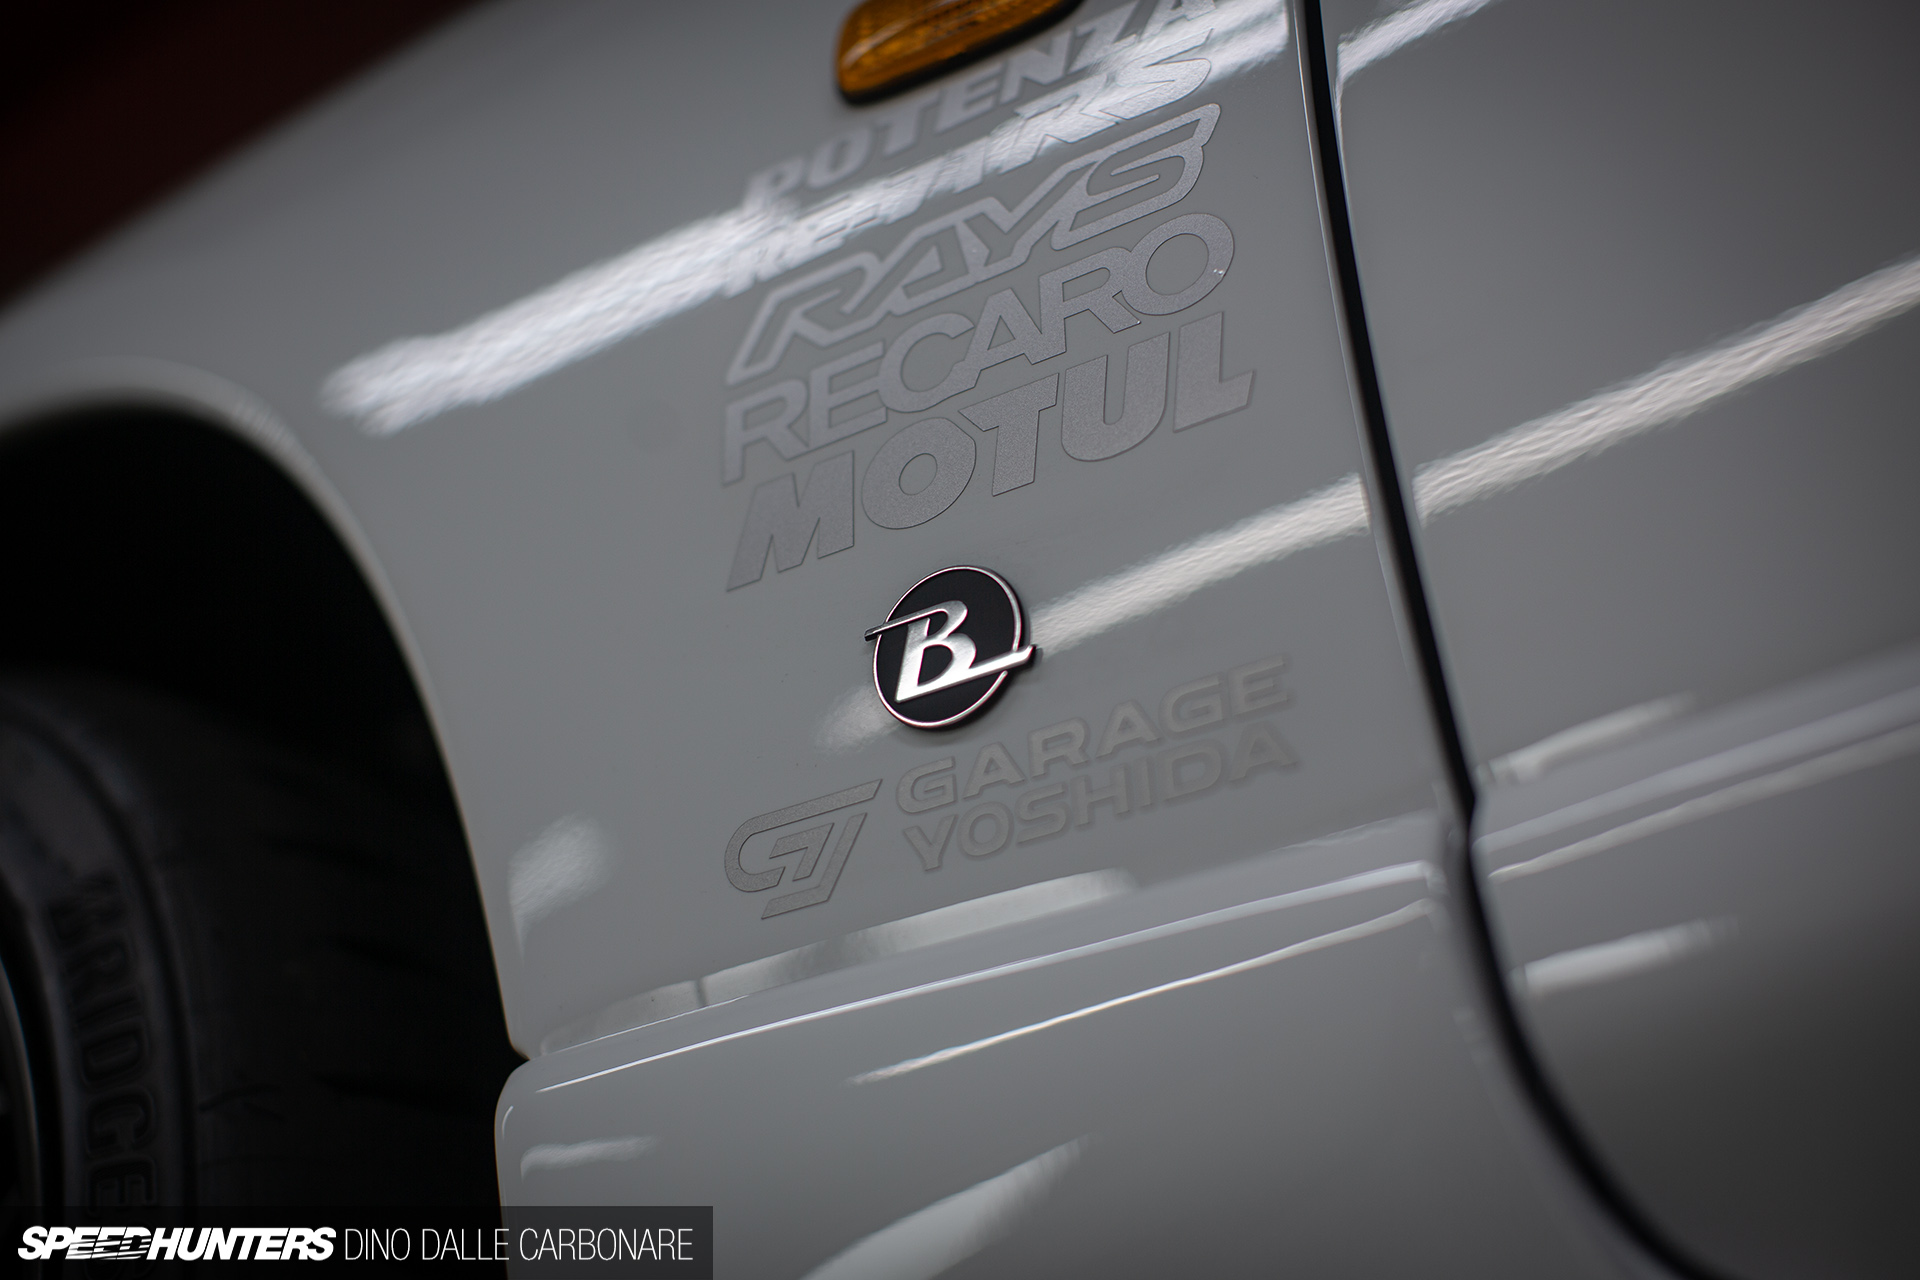 Redefining Perfection: The BBL R33 Skyline GT-R - Speedhunters